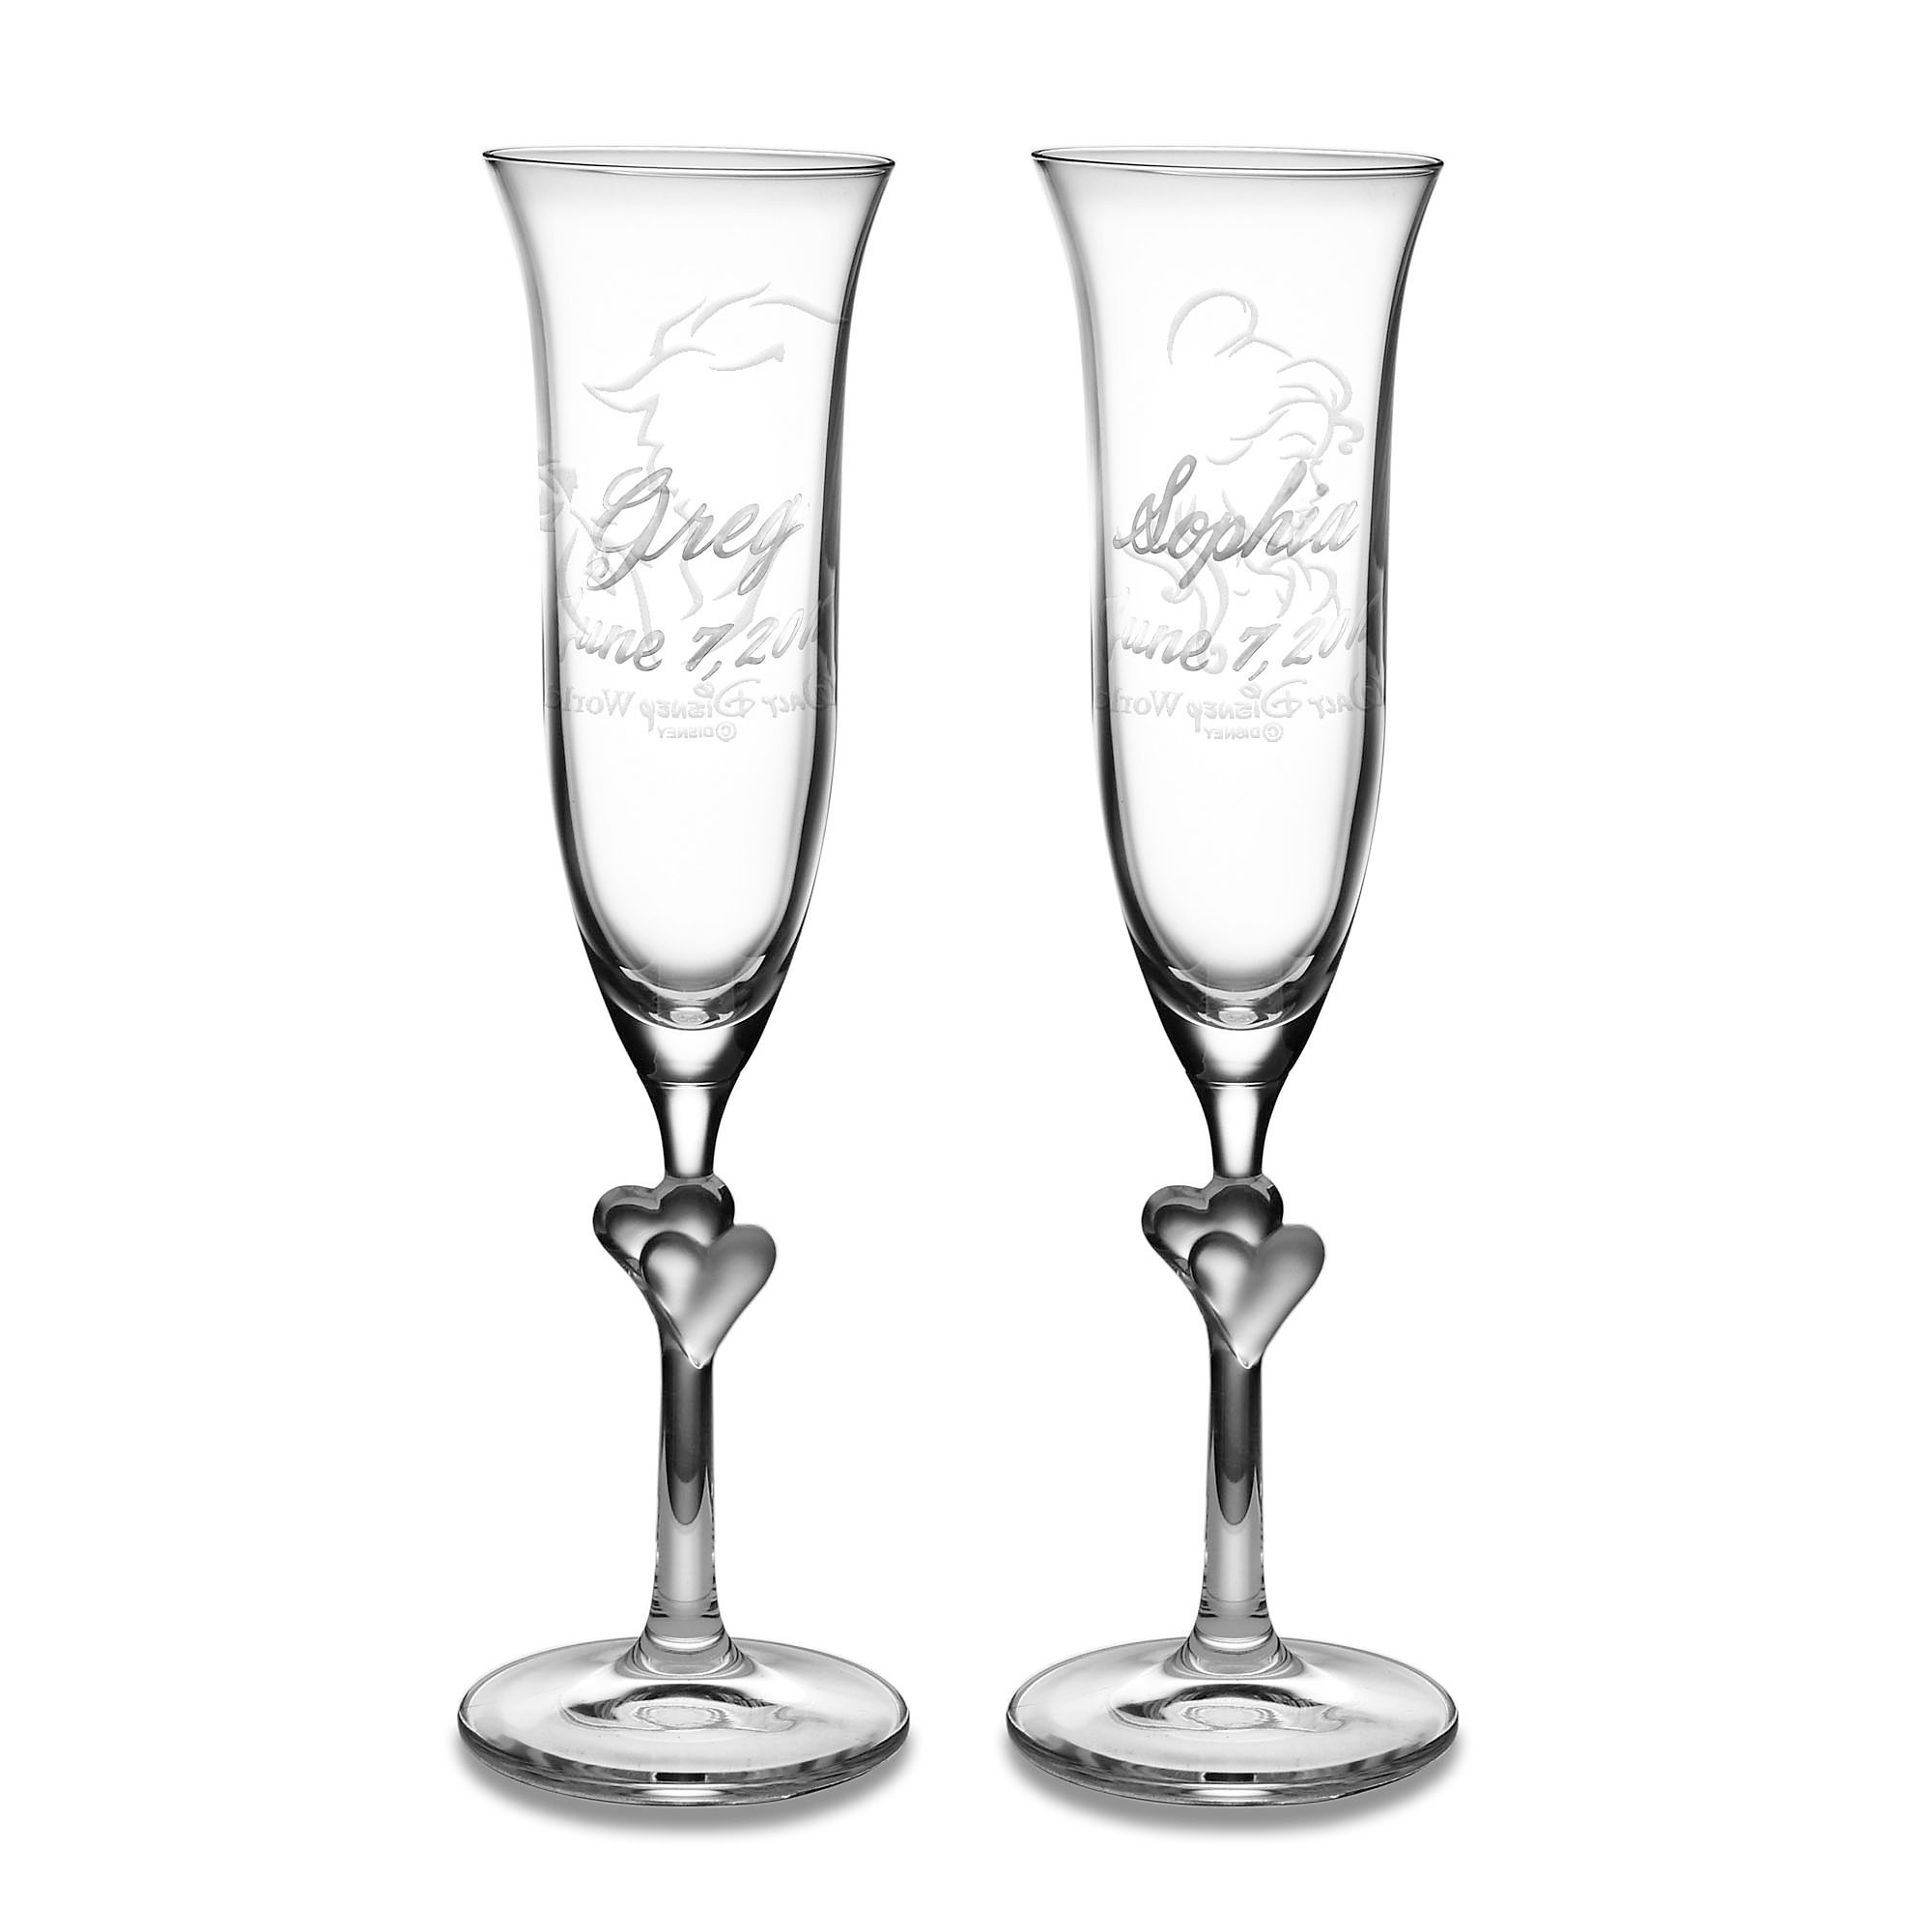 Beauty and the Beast Glass Flute Set by Arribas - Personalizable